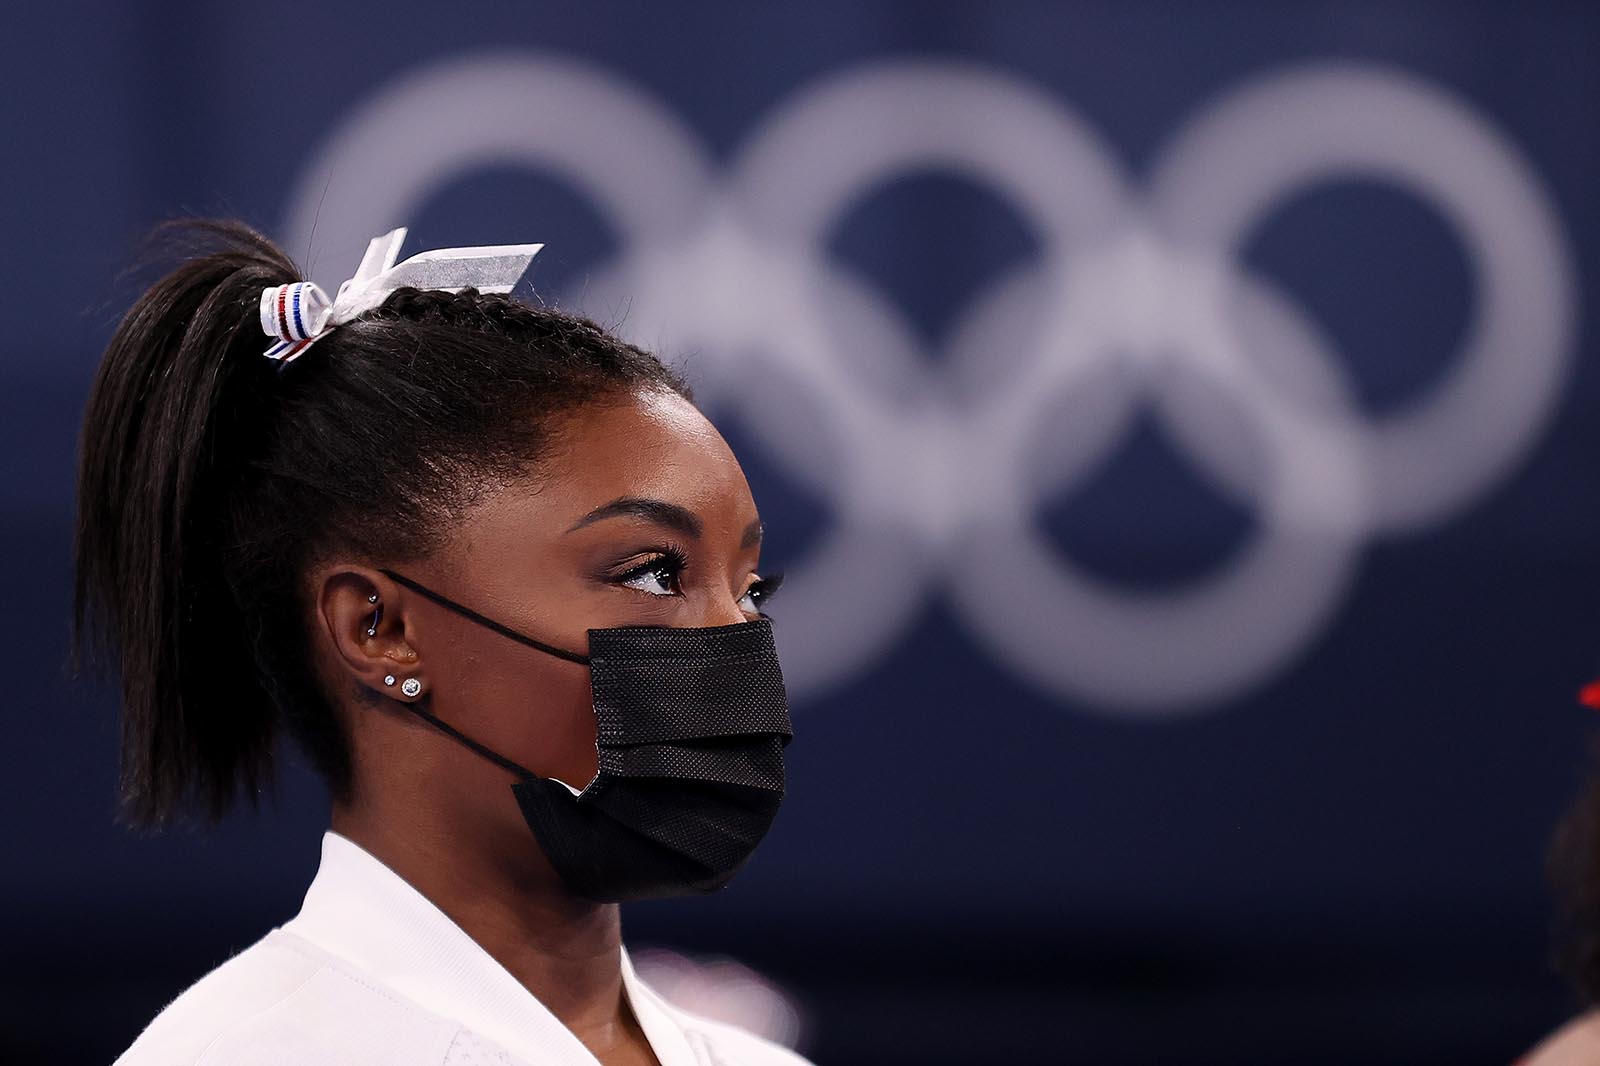 Simone Biles looks on during the Women's Team Final on July 27.